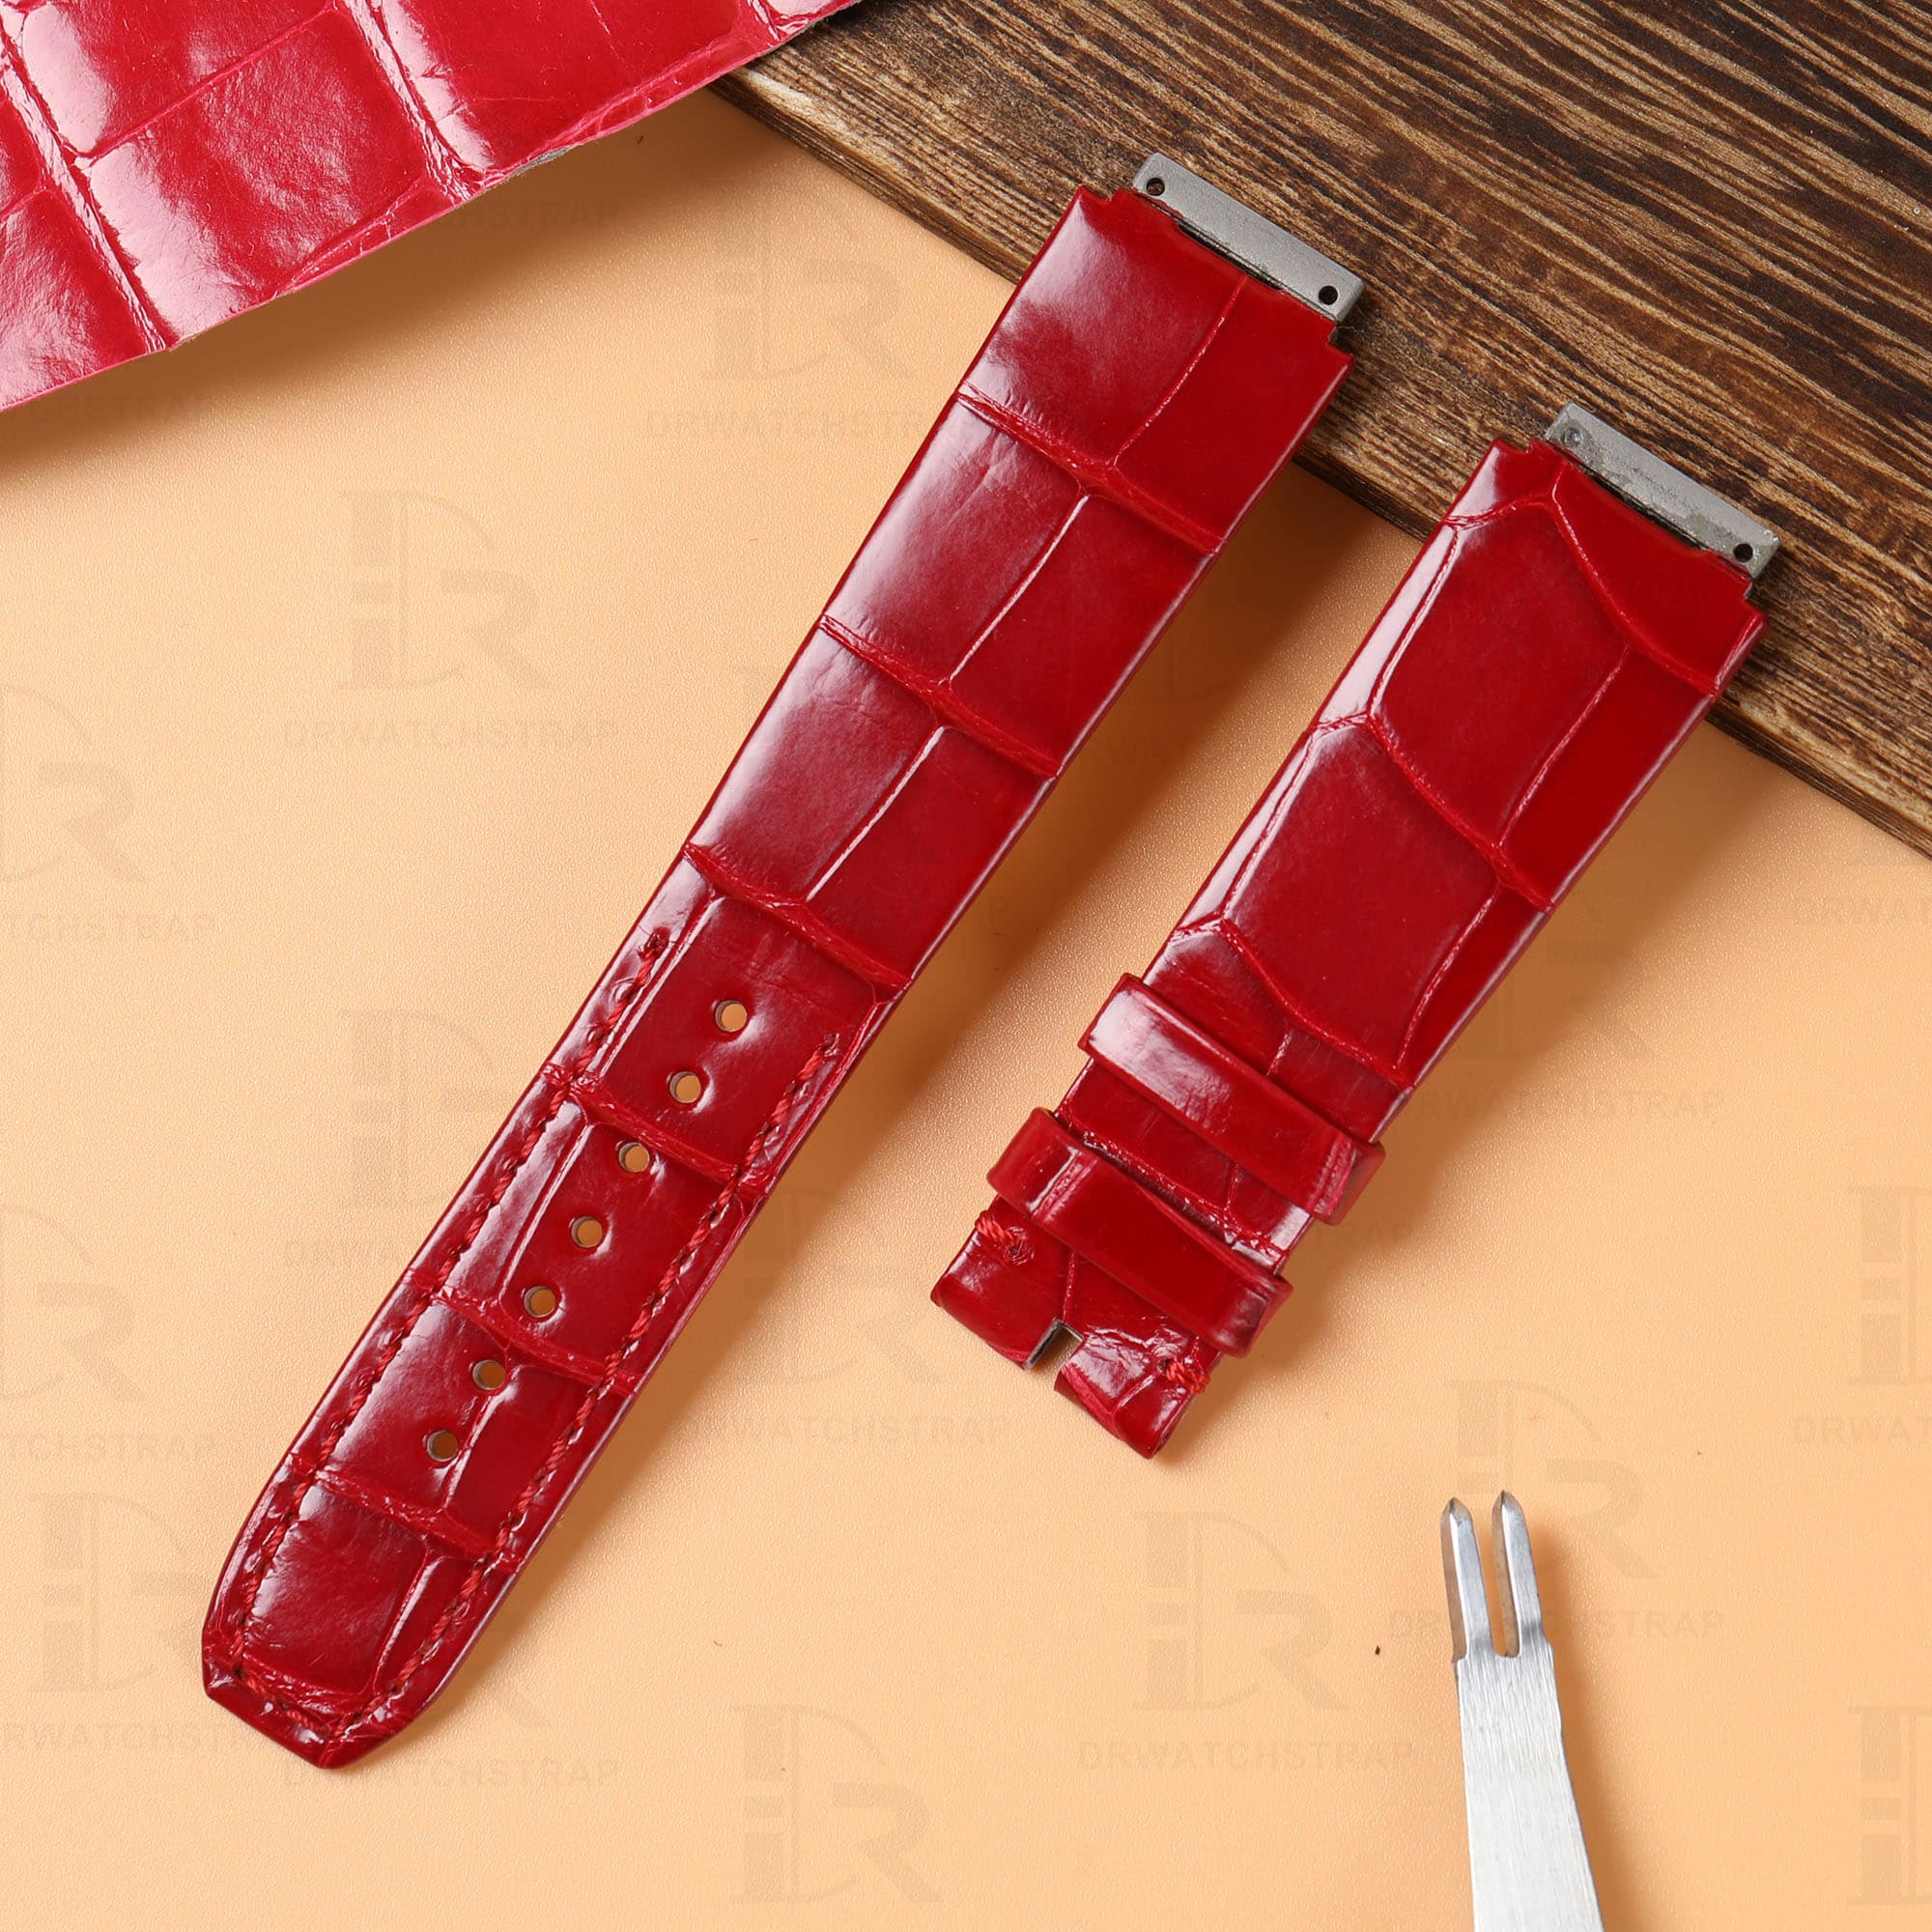 Replacement red crocodile alligator belly-scale leather straps for Richard Mille watch band